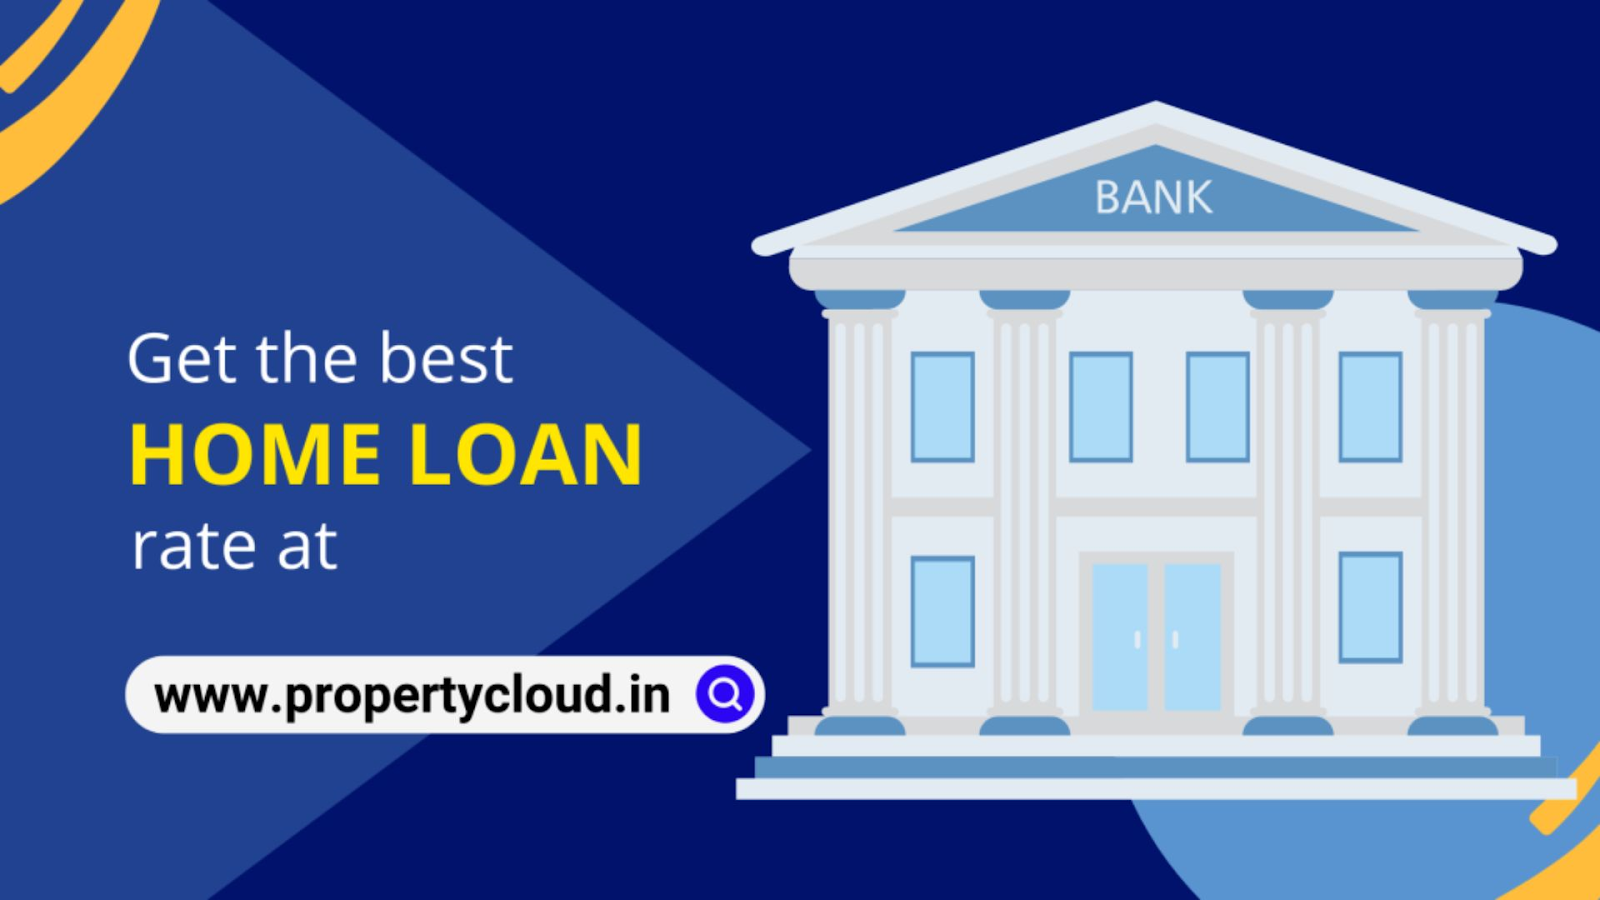 Get the best home loan rates at PropertyCloud